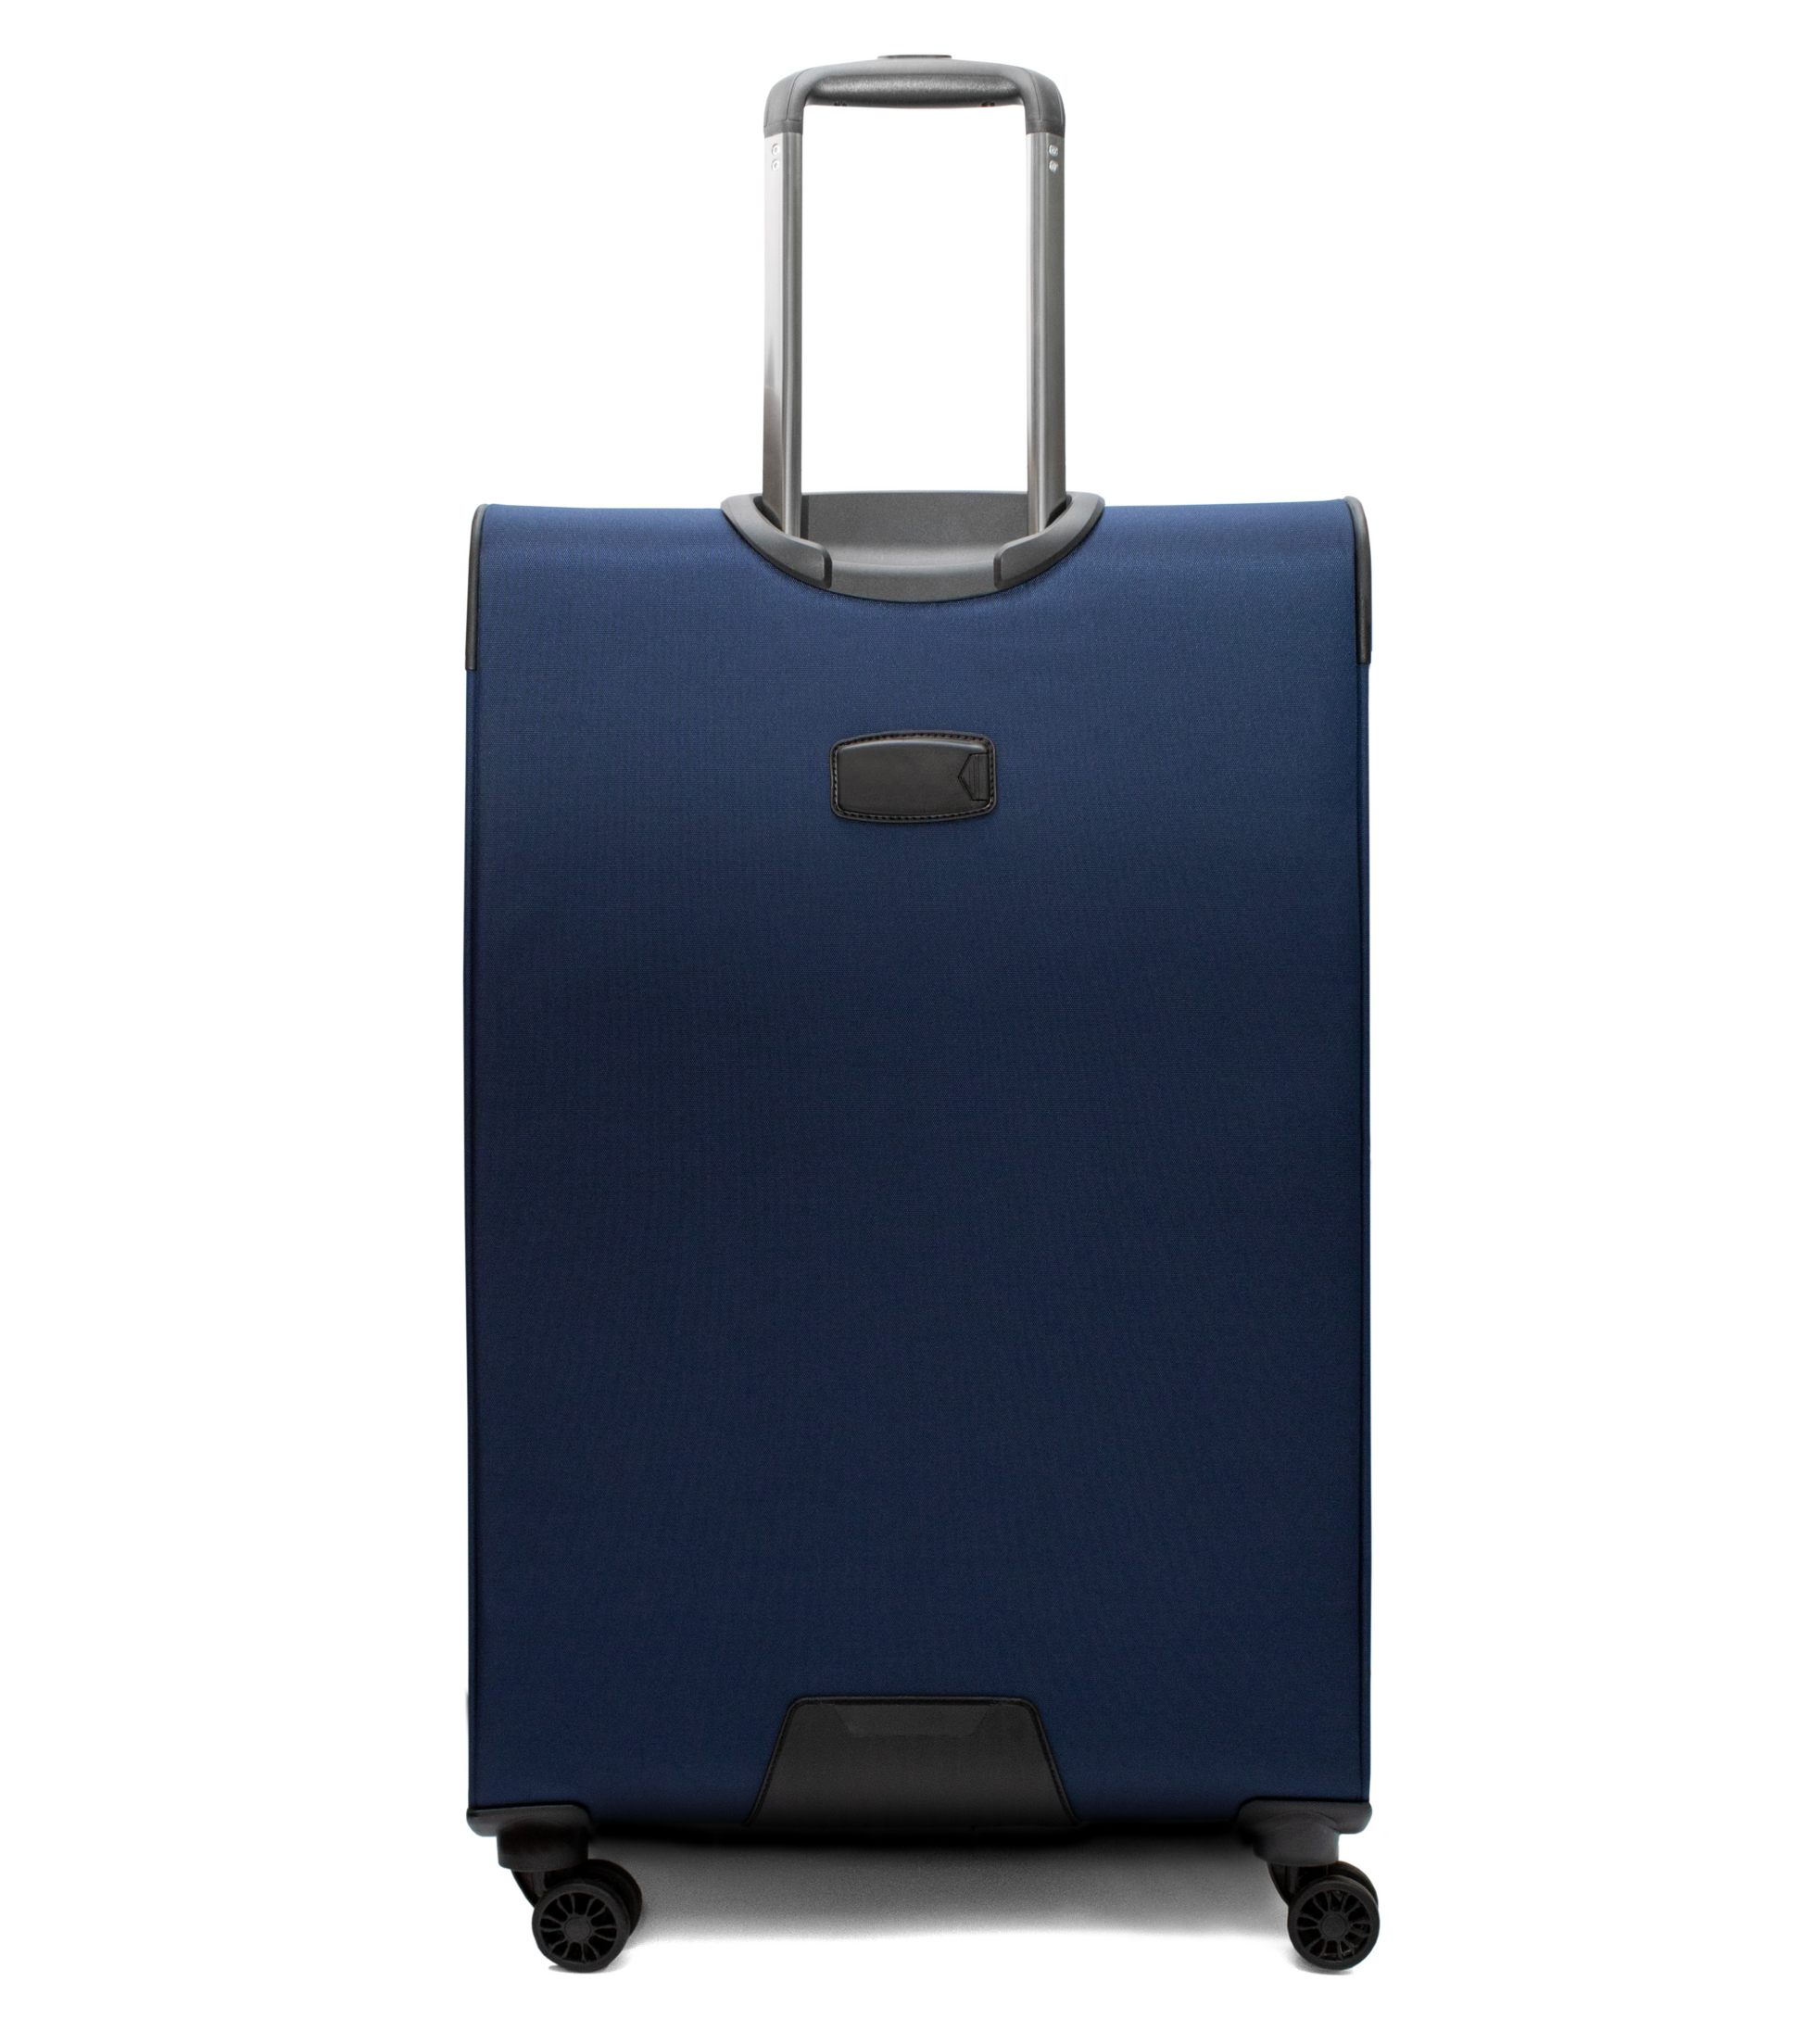 Cavalinho Check-in Softside Luggage (24" or 28") - 28 inch SteelBlue - 68020003.03.28_3